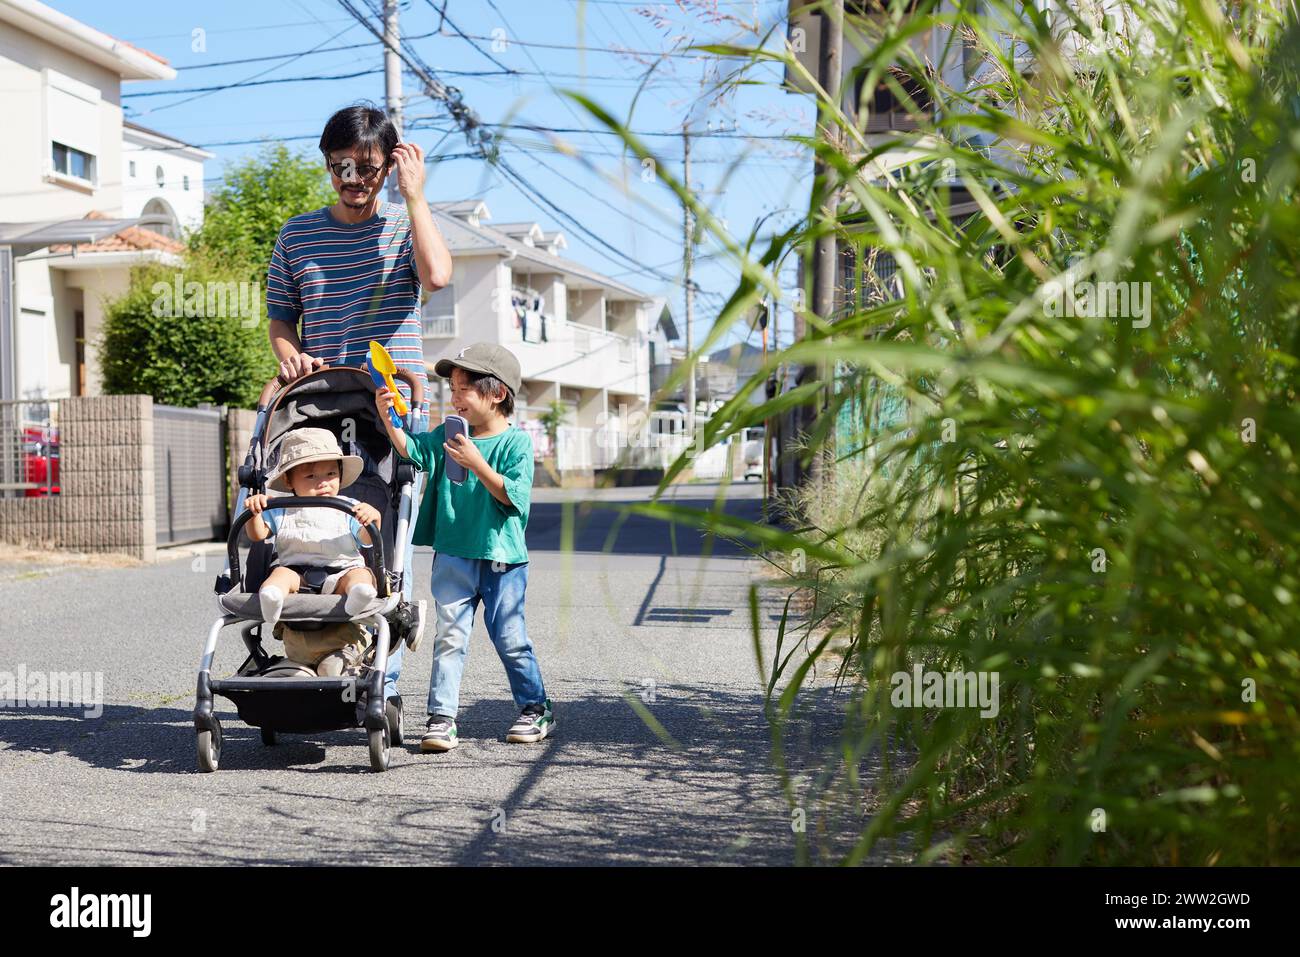 A man and two children walking down a street Stock Photo